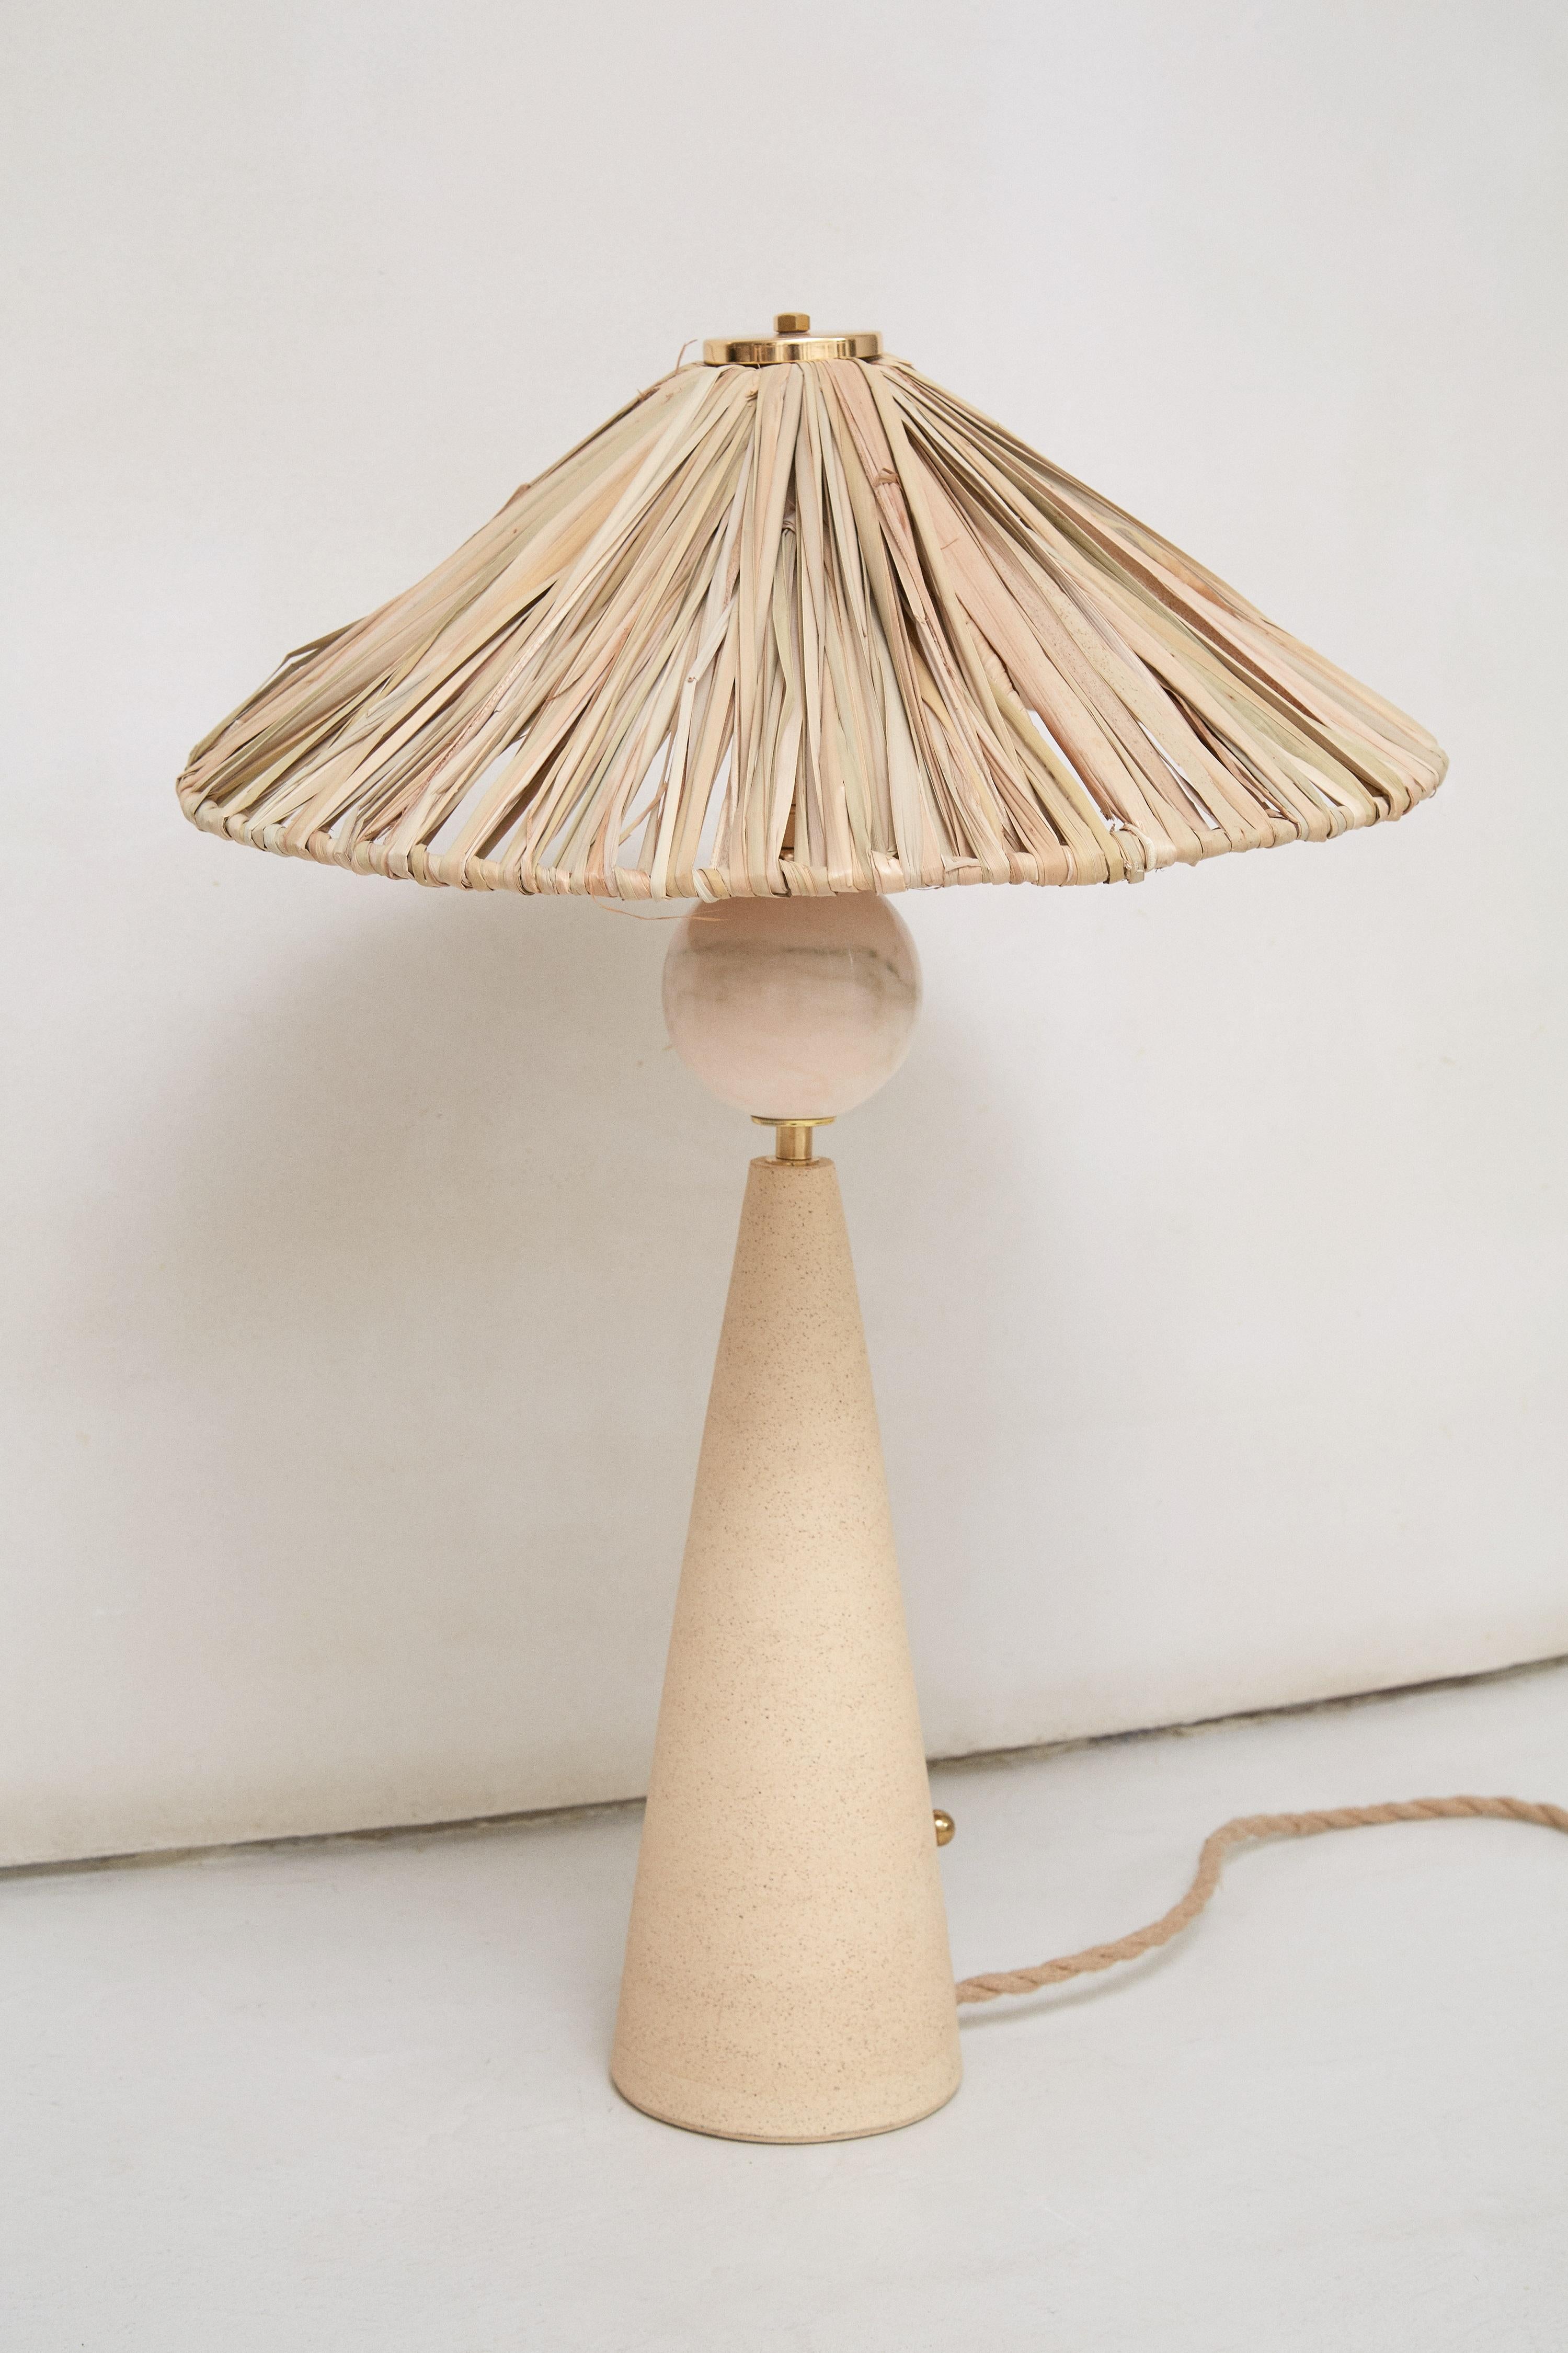 Rattan Table Lamp by Patricia Bustos de la Torre
Dimensions: D 52 x W 52 x H 71 cm.
Materials: Rattan, pink Portuguese marble and brass.

This table lamp immediately transports us to a mediterranean fantasy with its handmade rattan hat. Below this